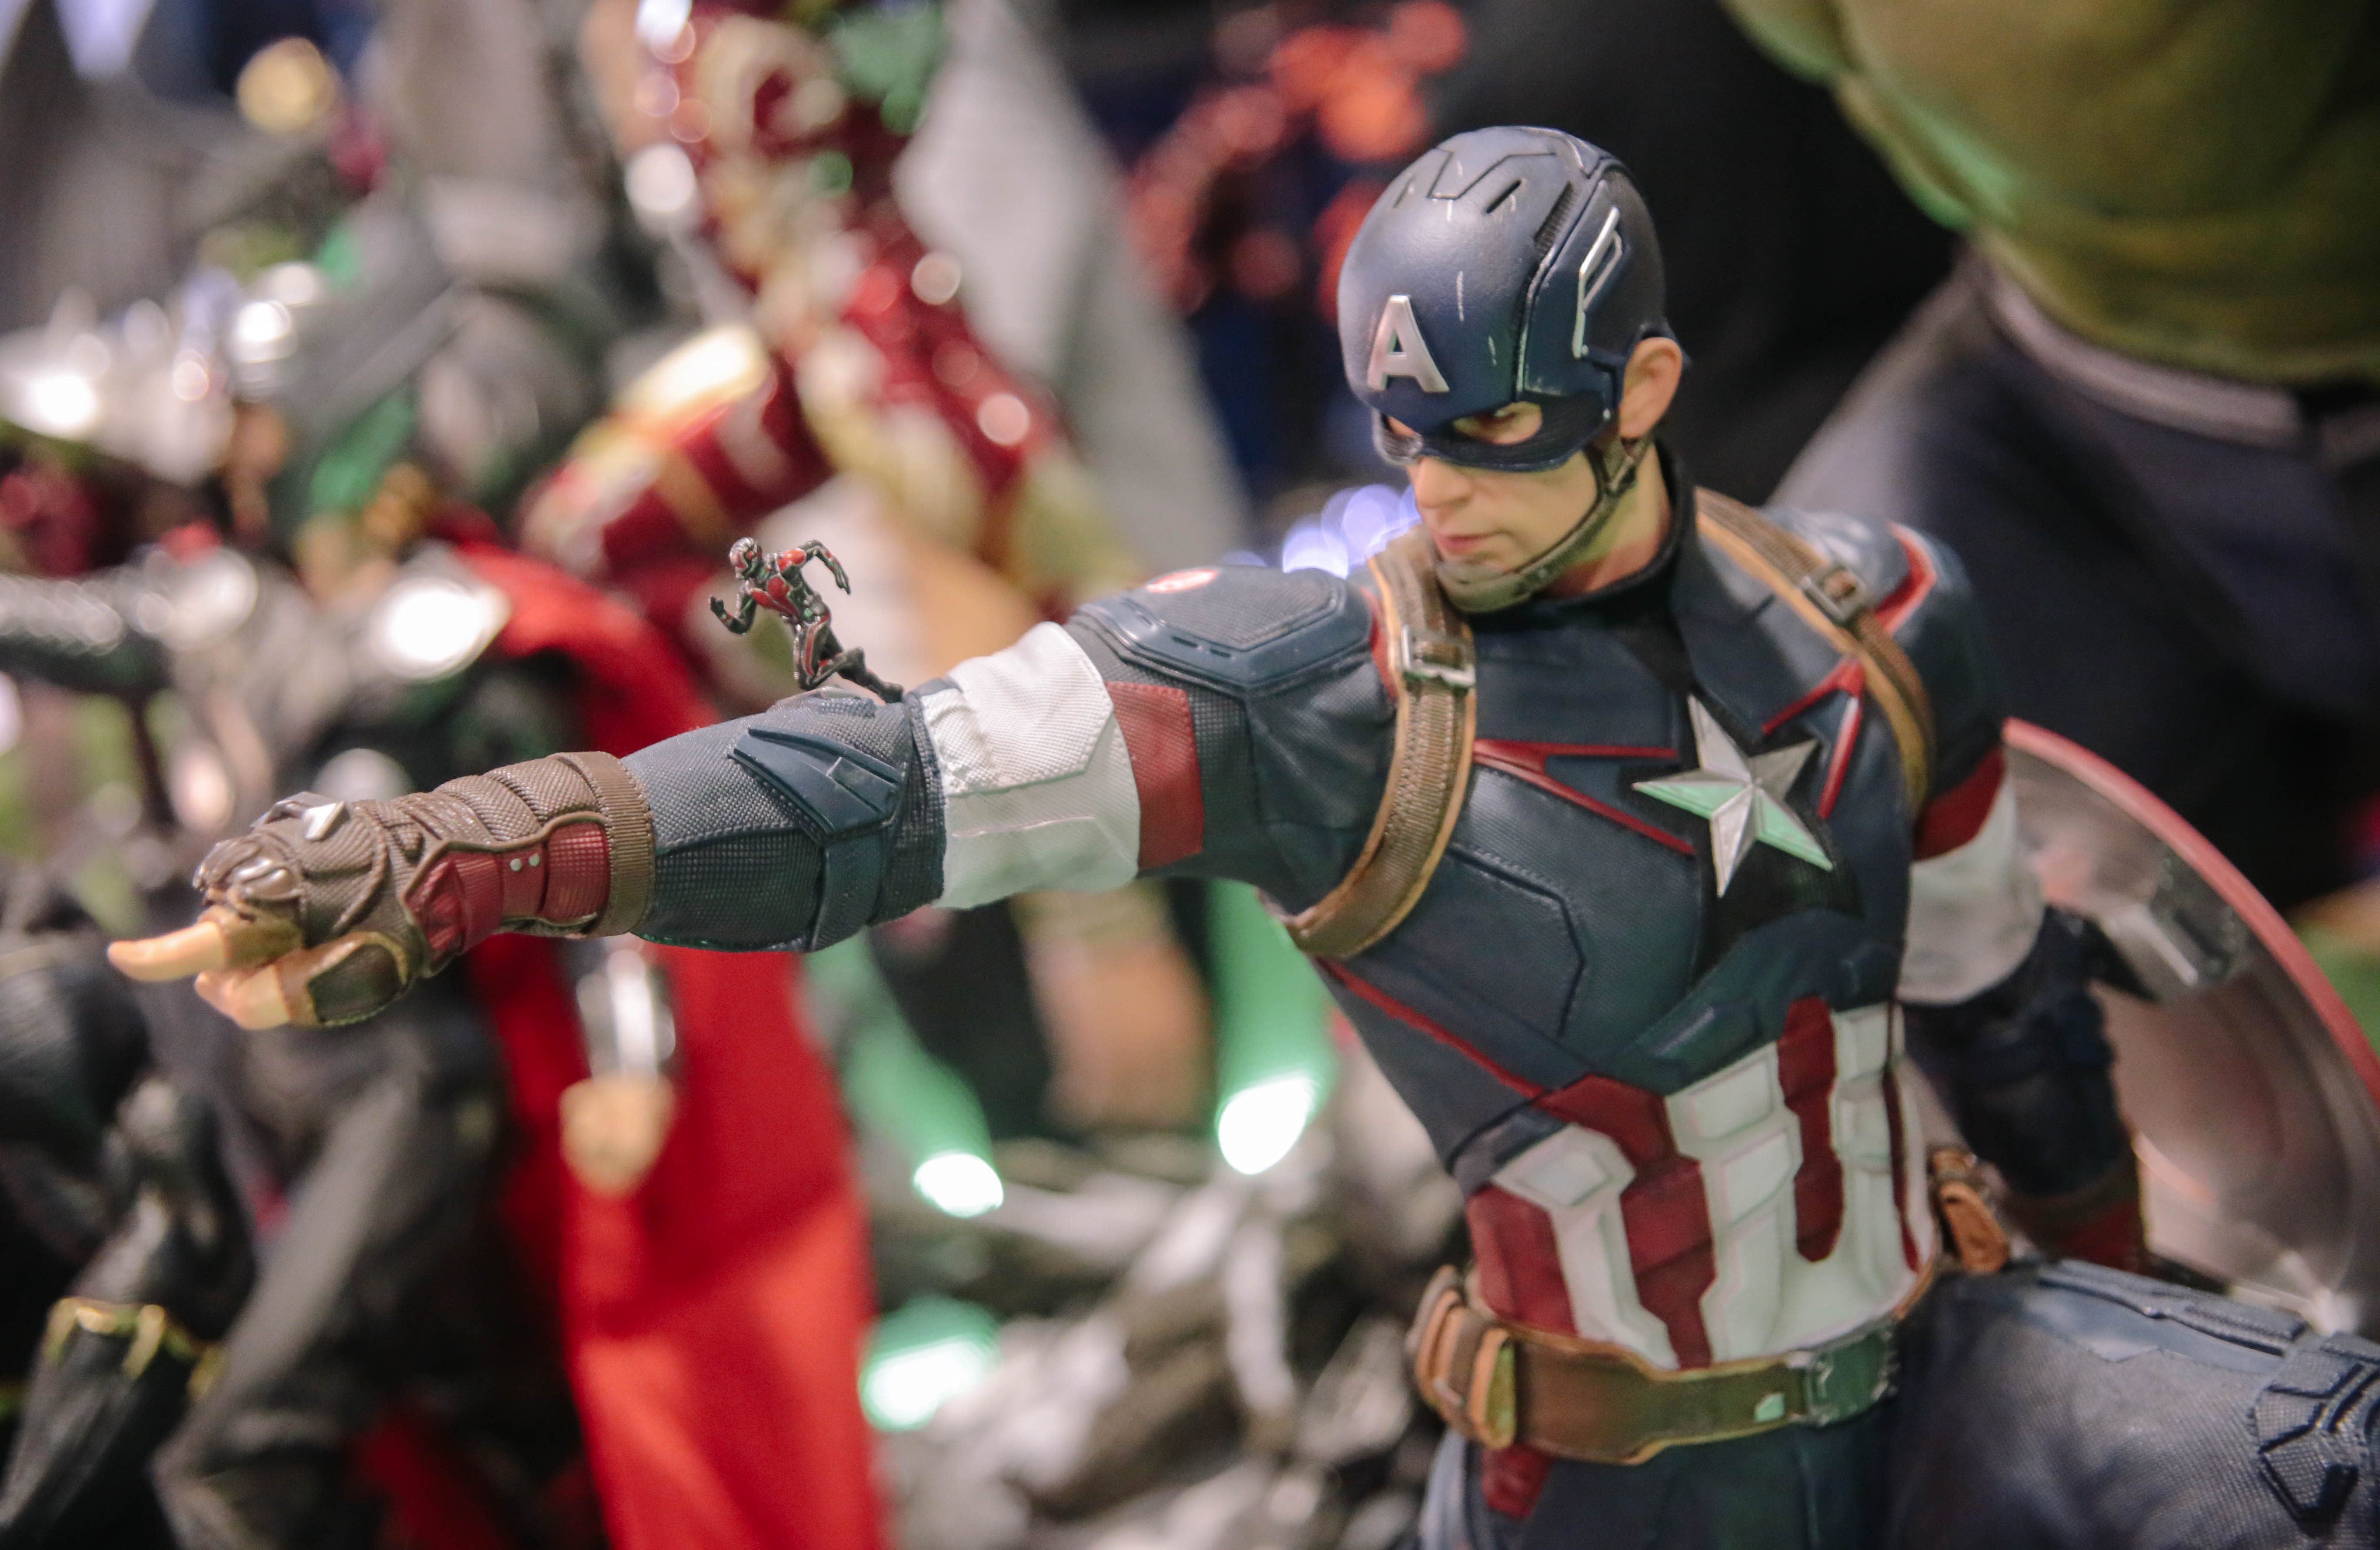 Captain America and Ant-Man. Photo by Paolo Abad/Rappler  